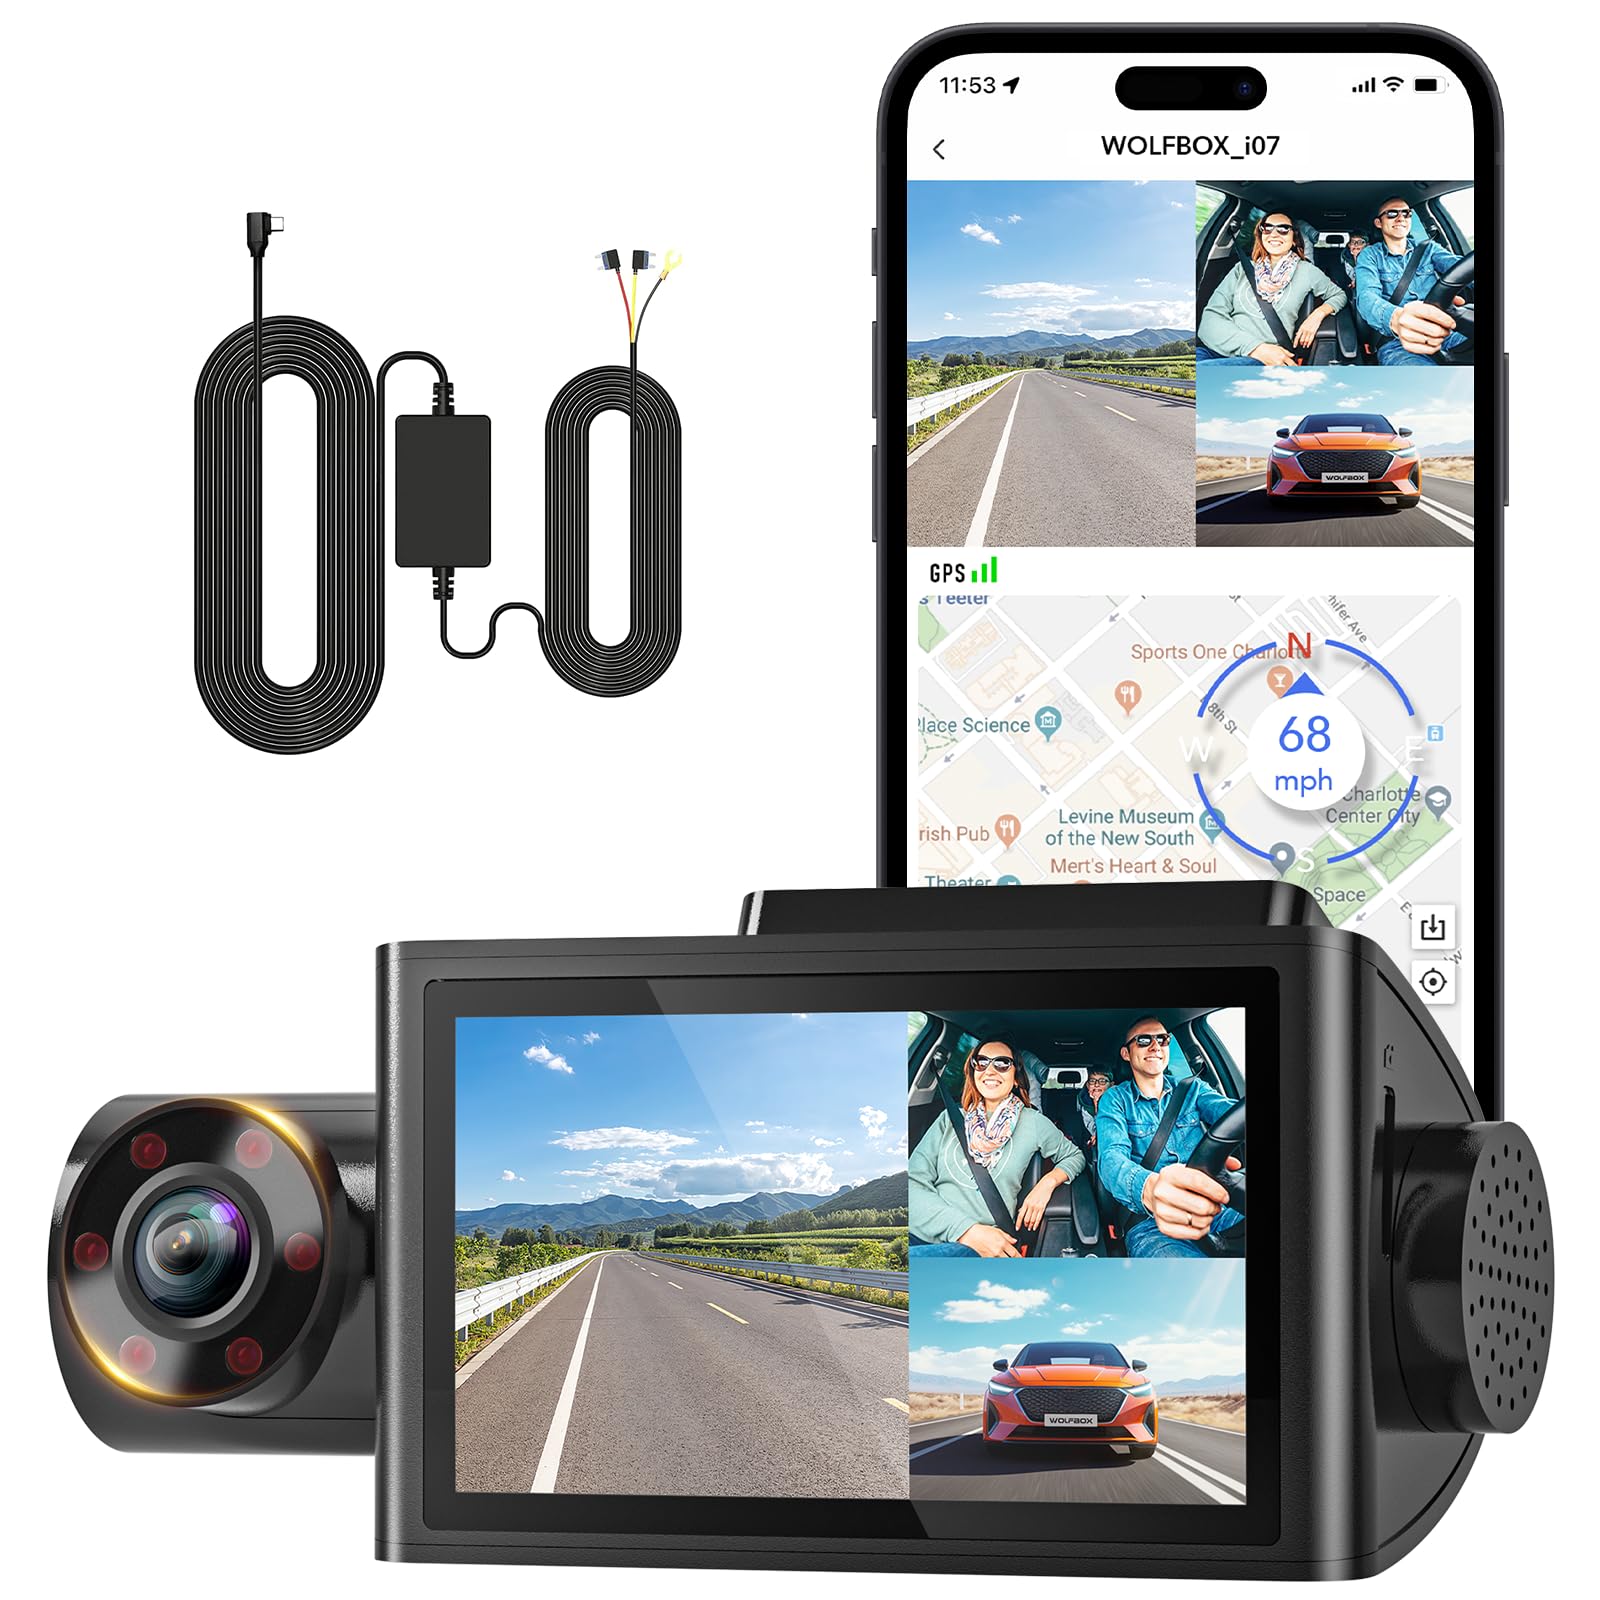 【i07 + Hardwire Kit】 WOLFBOX i07 Dash Cam, 3 Channel Dash Cam with Hardwire kit for Parking Mode